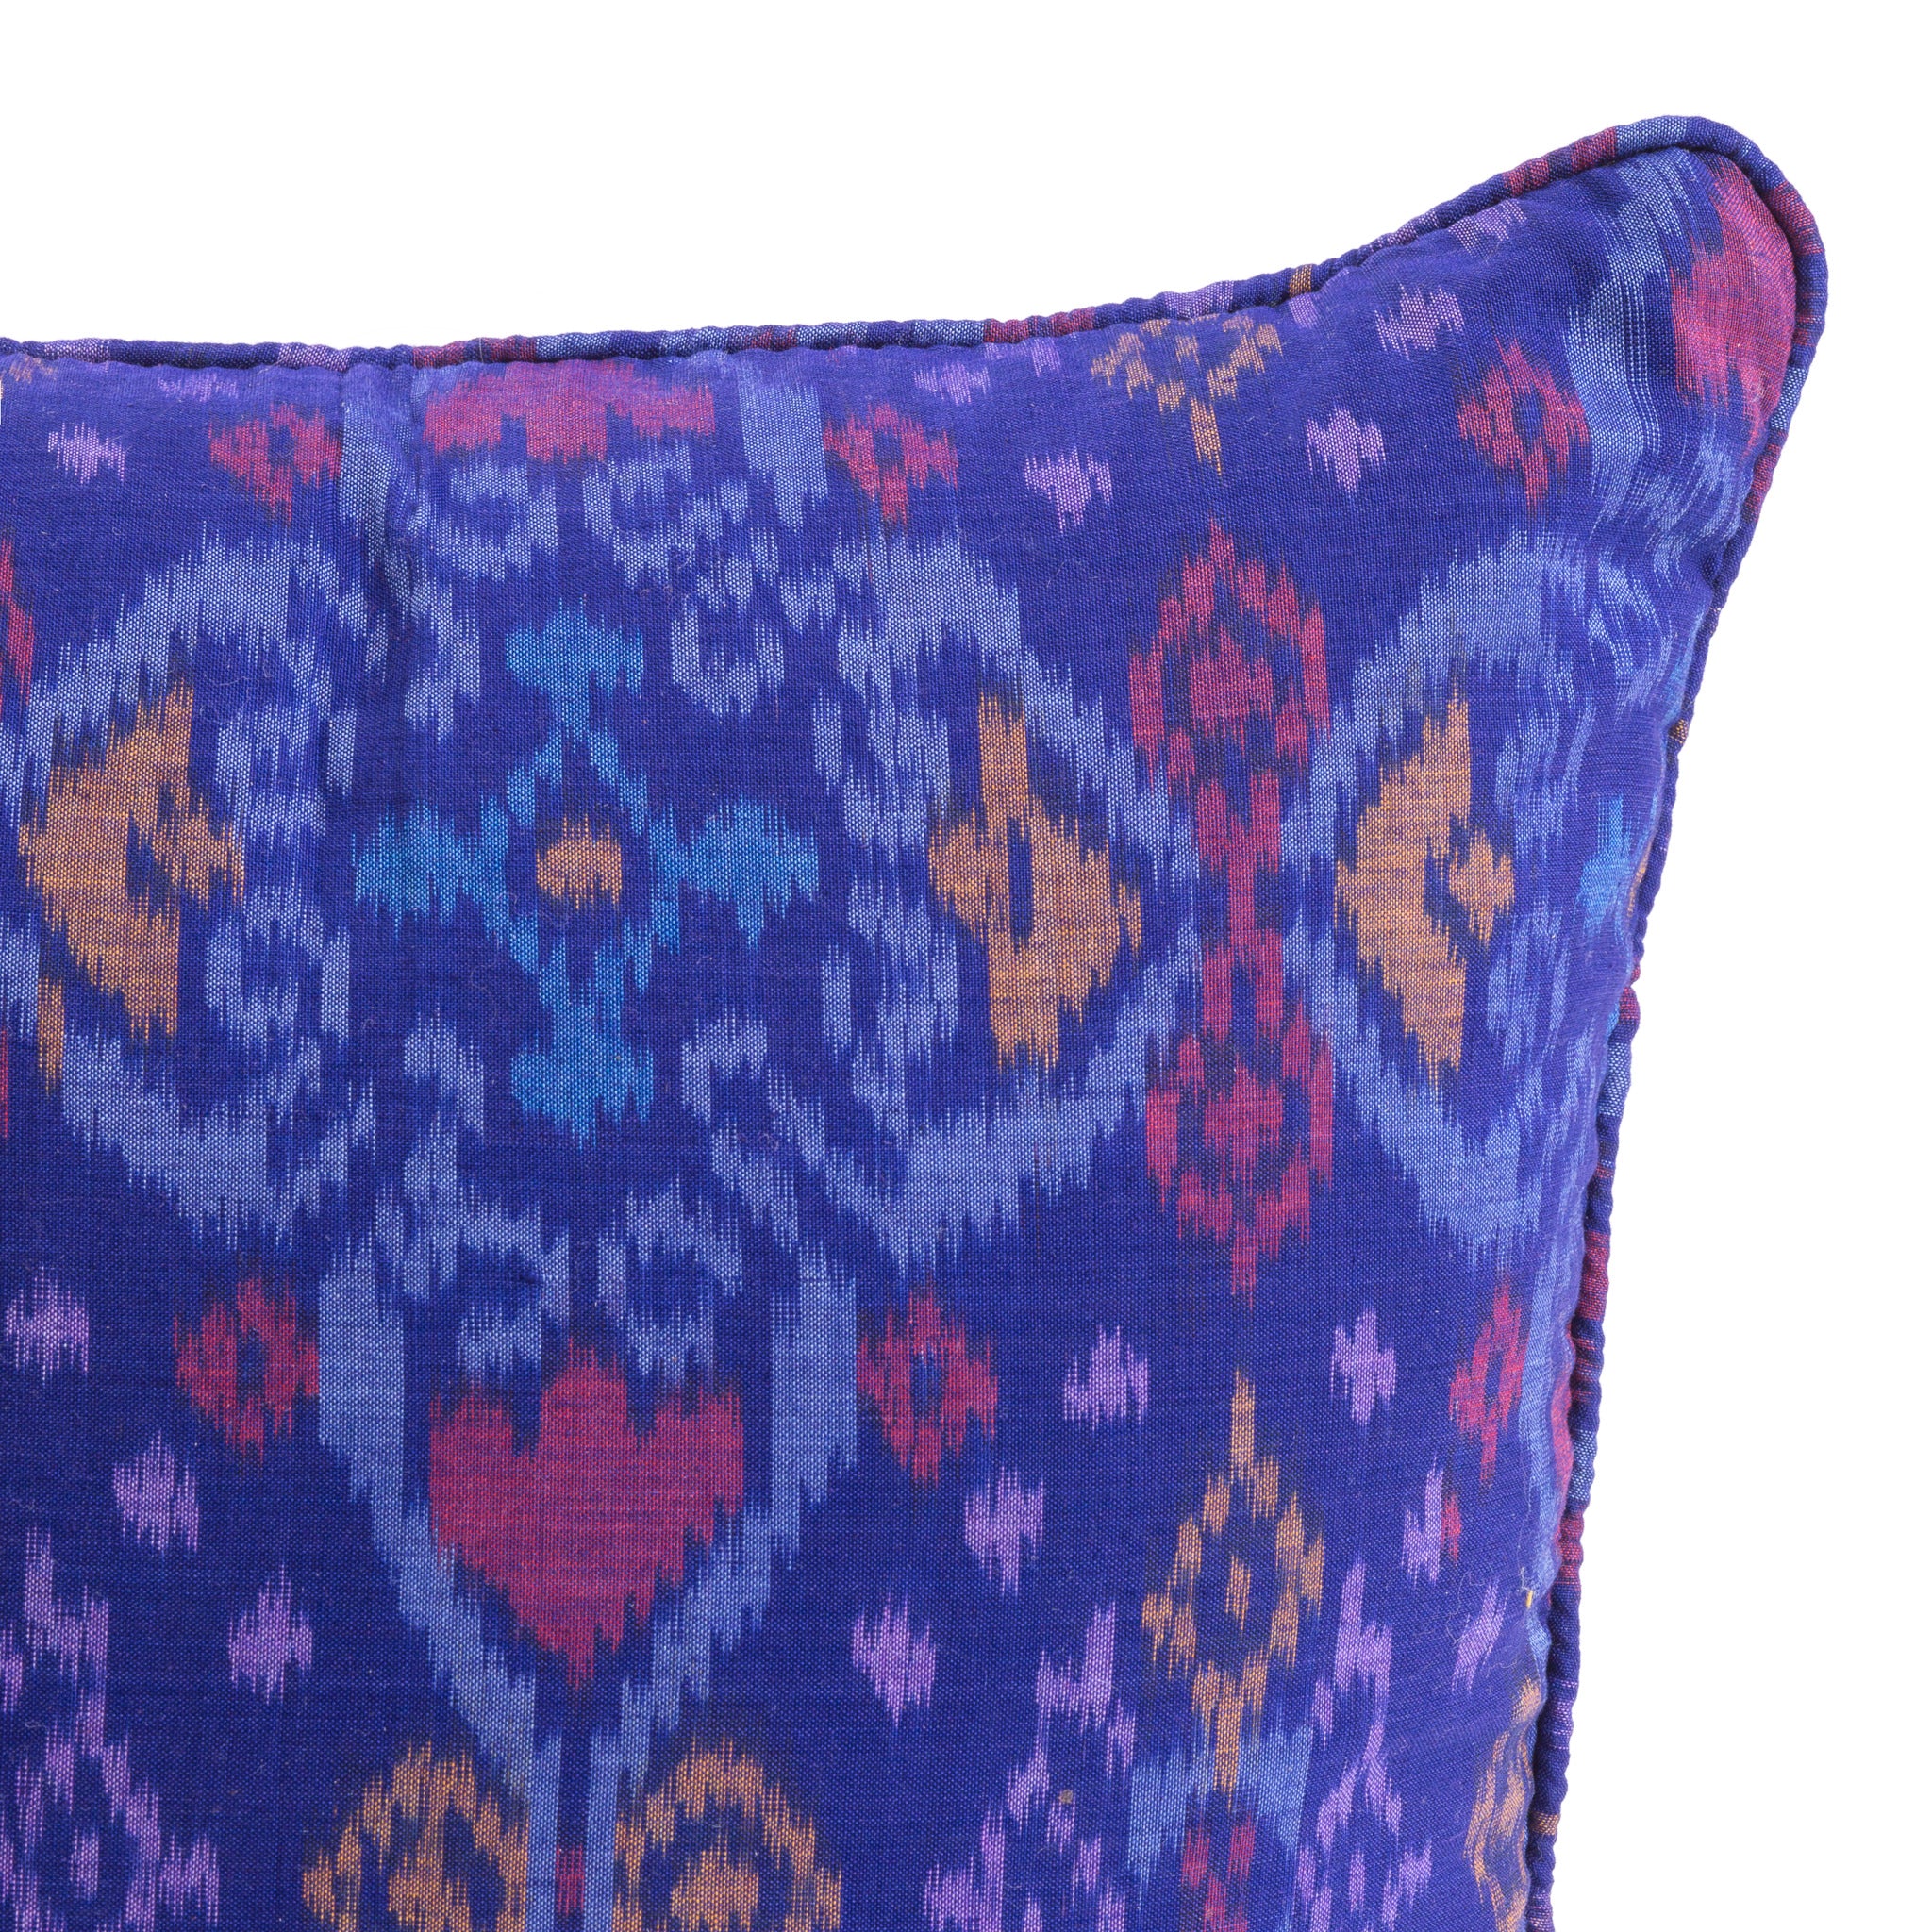 Royal Blue, Purple, Red and Peach Ikat Square Scatter Cushion from Bali, Indonesia - DETAIL